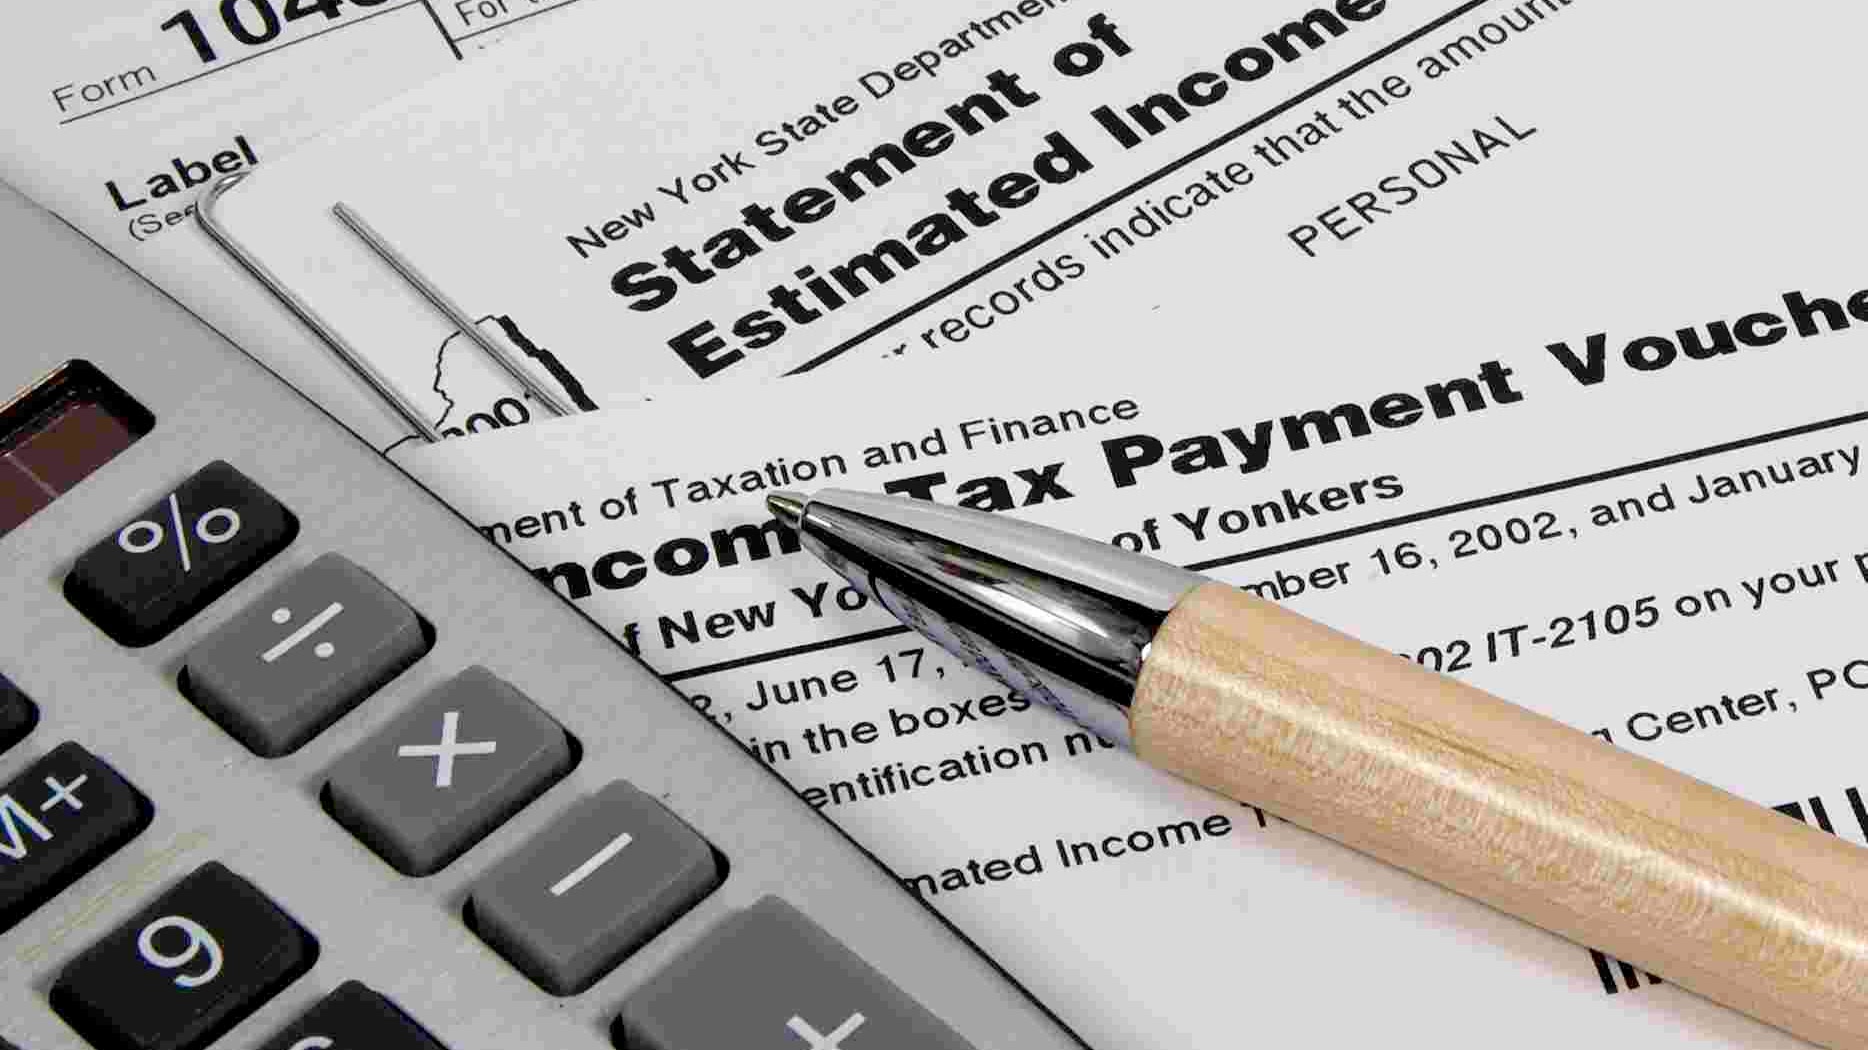 Lavien Tax & Accounting Services, Inc.